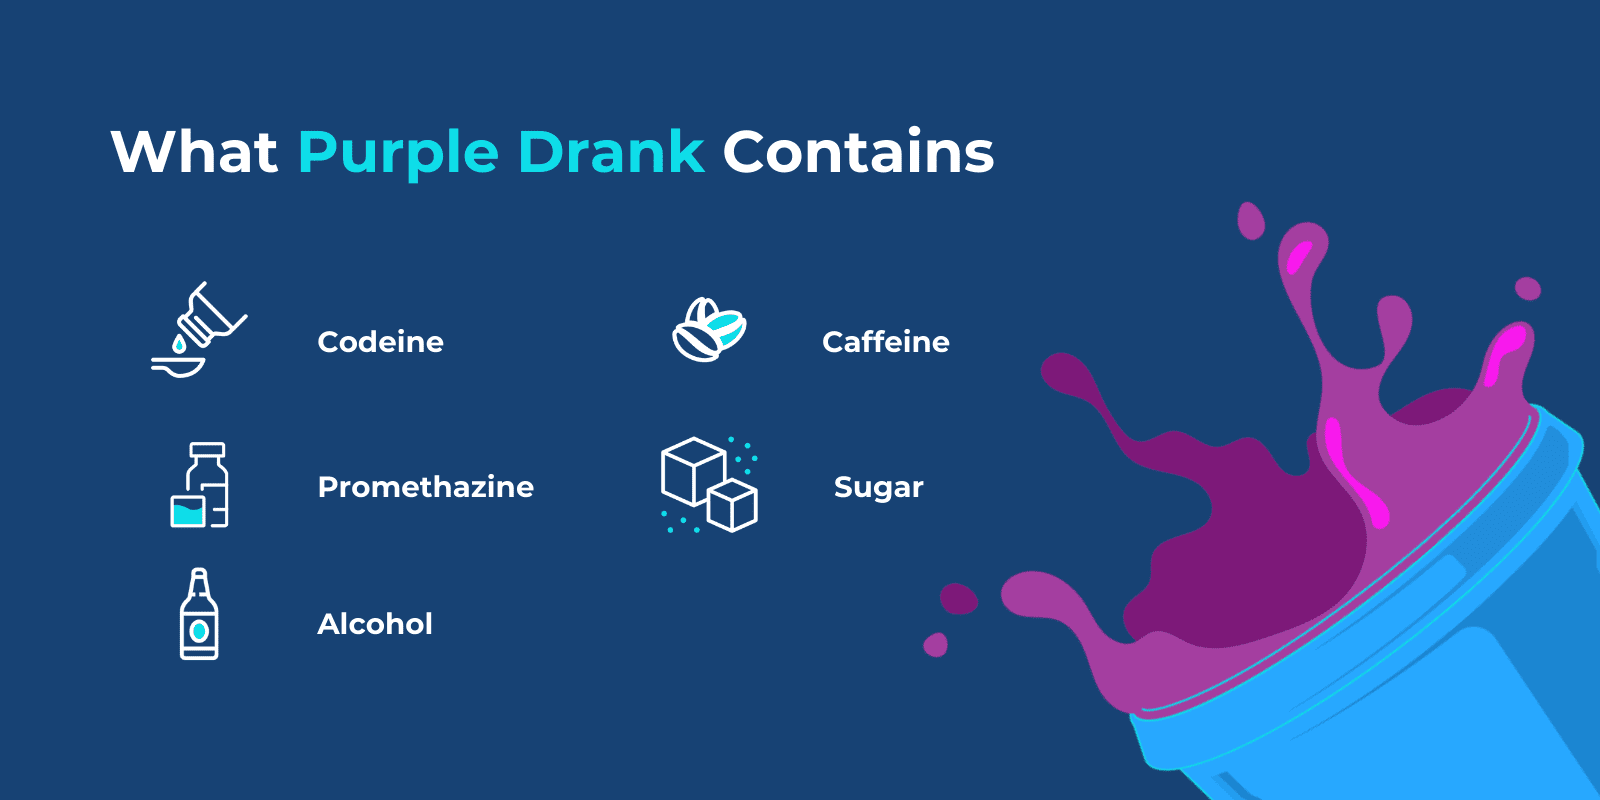 "What Purple Drank Contains: Codeine, Promethazine, Alcohol, Caffeine, and Sugar" illustrated with relevant icons for each ingredient next to a purple drank graphic